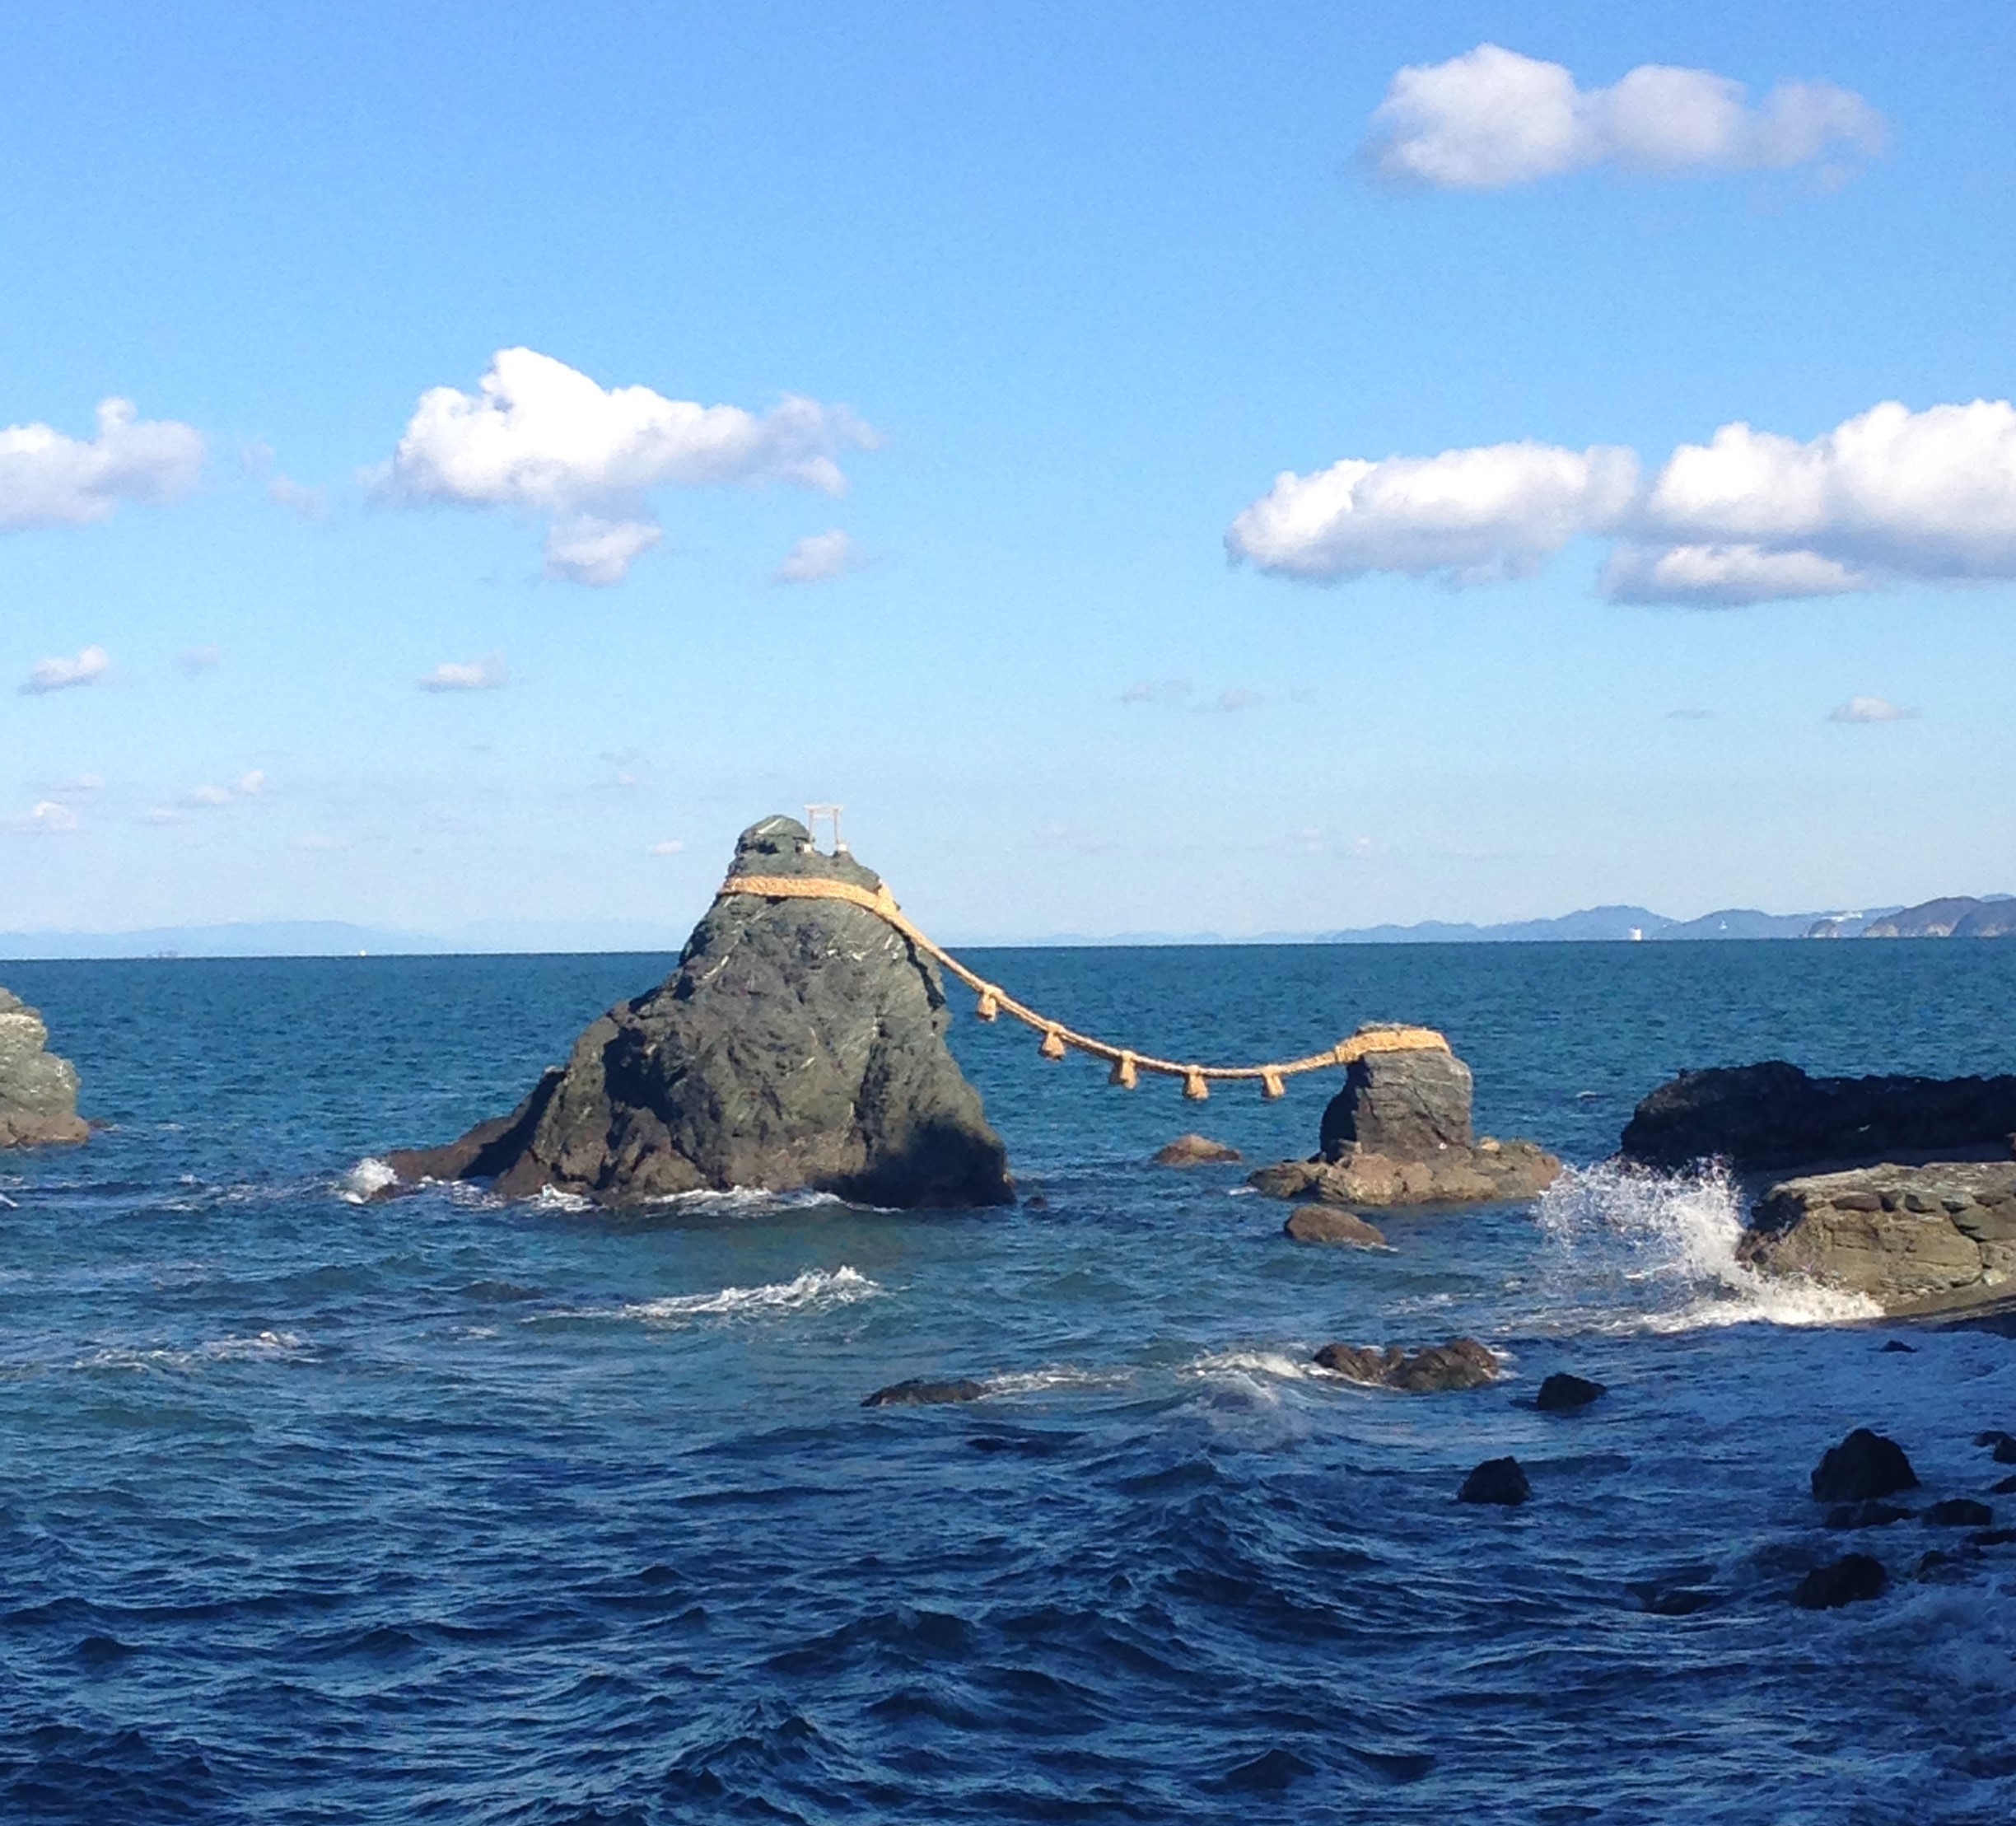 two large rocks connected by a long rope and a shrine on the taller rock in the blue sea